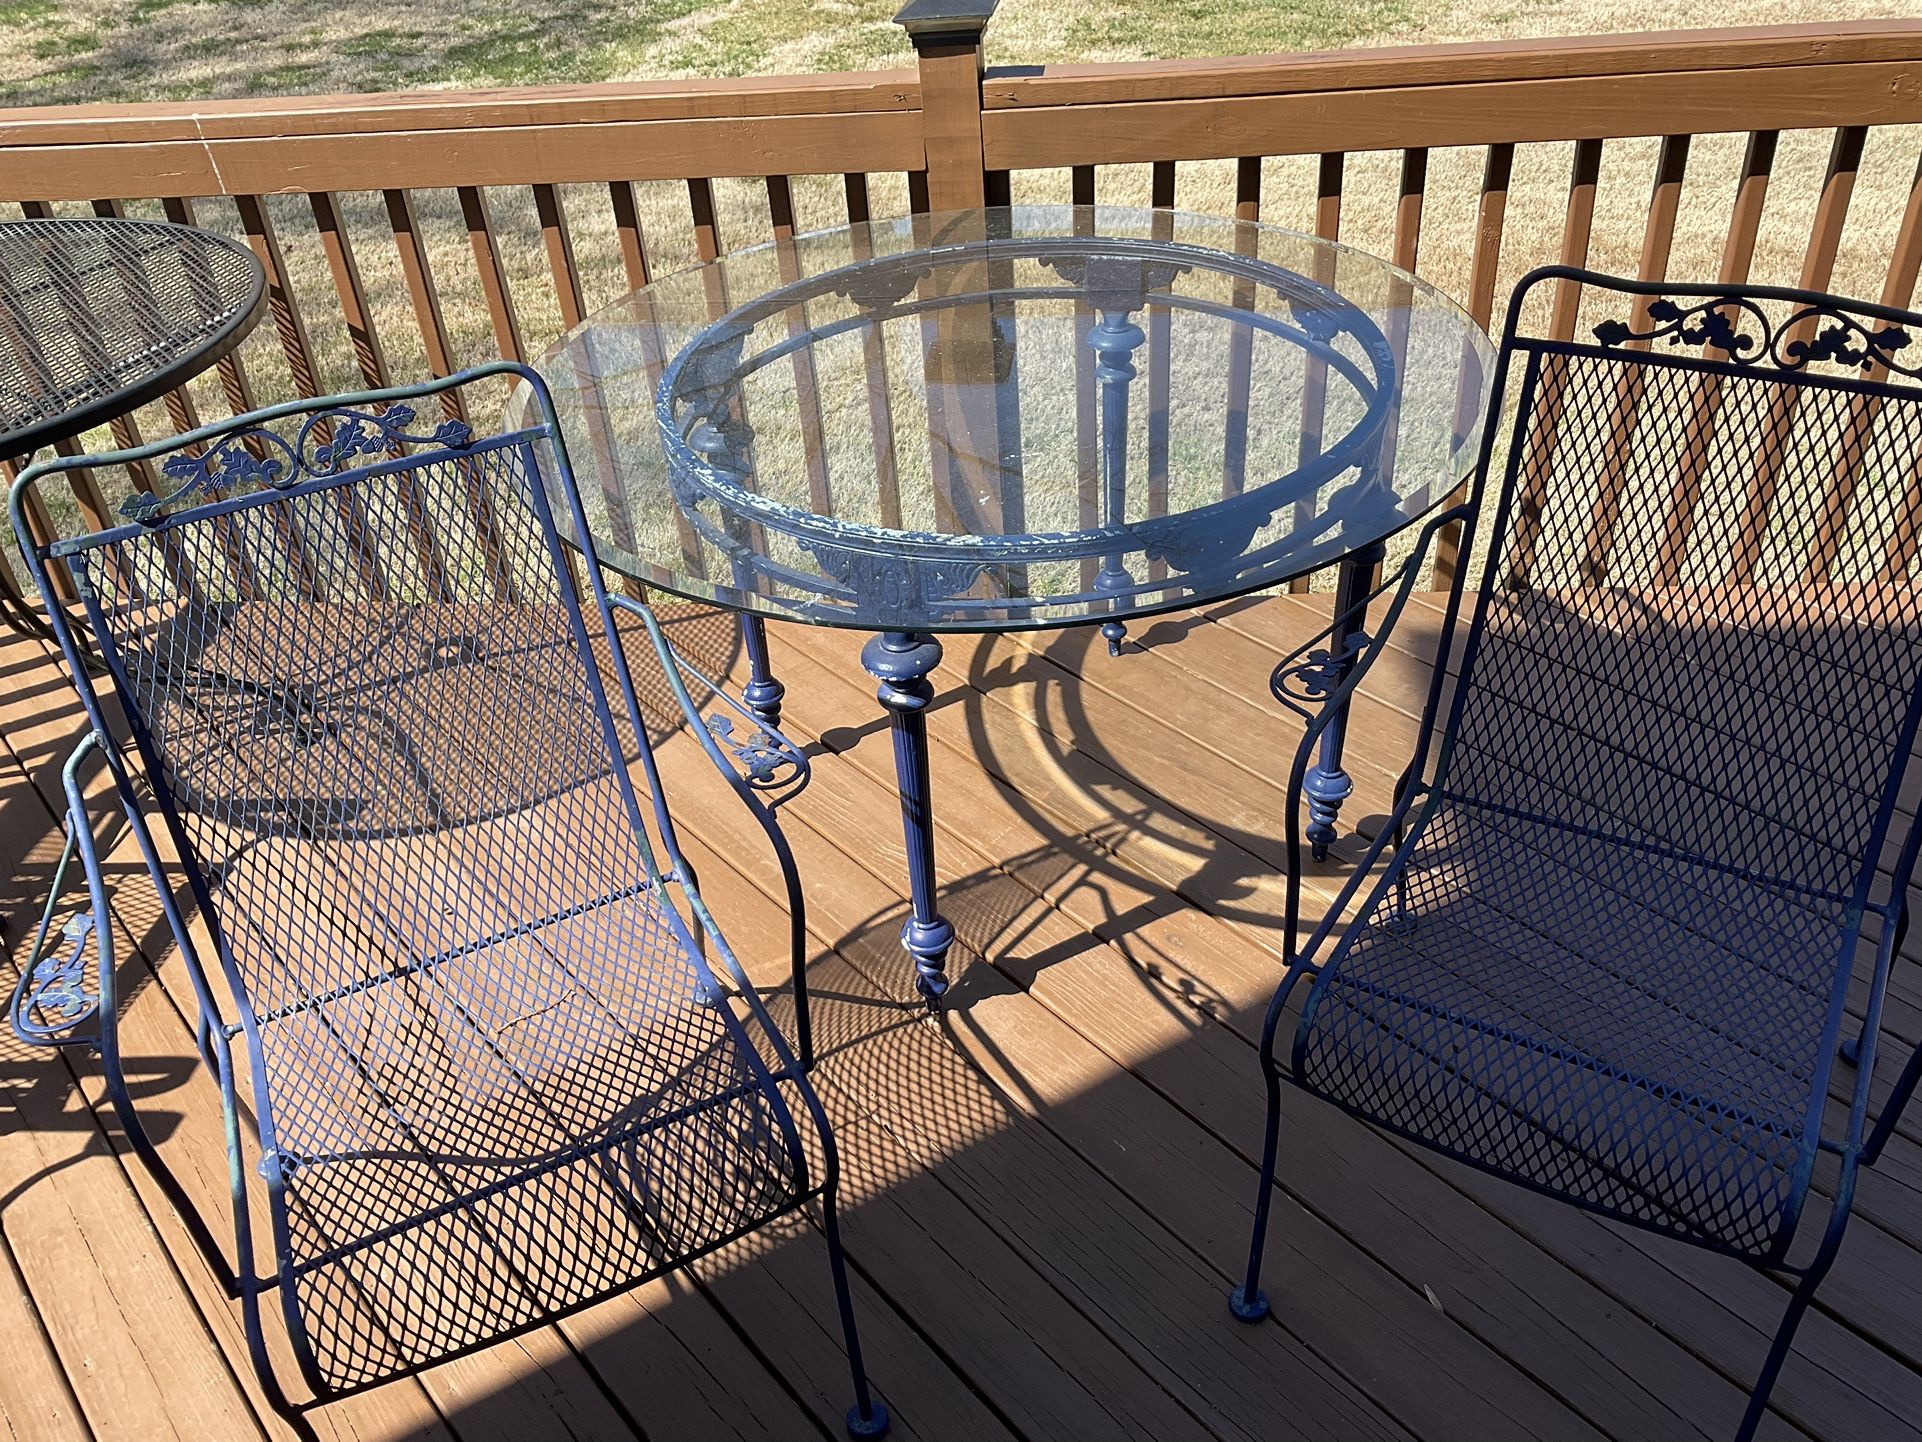 Wrought iron table and chairs